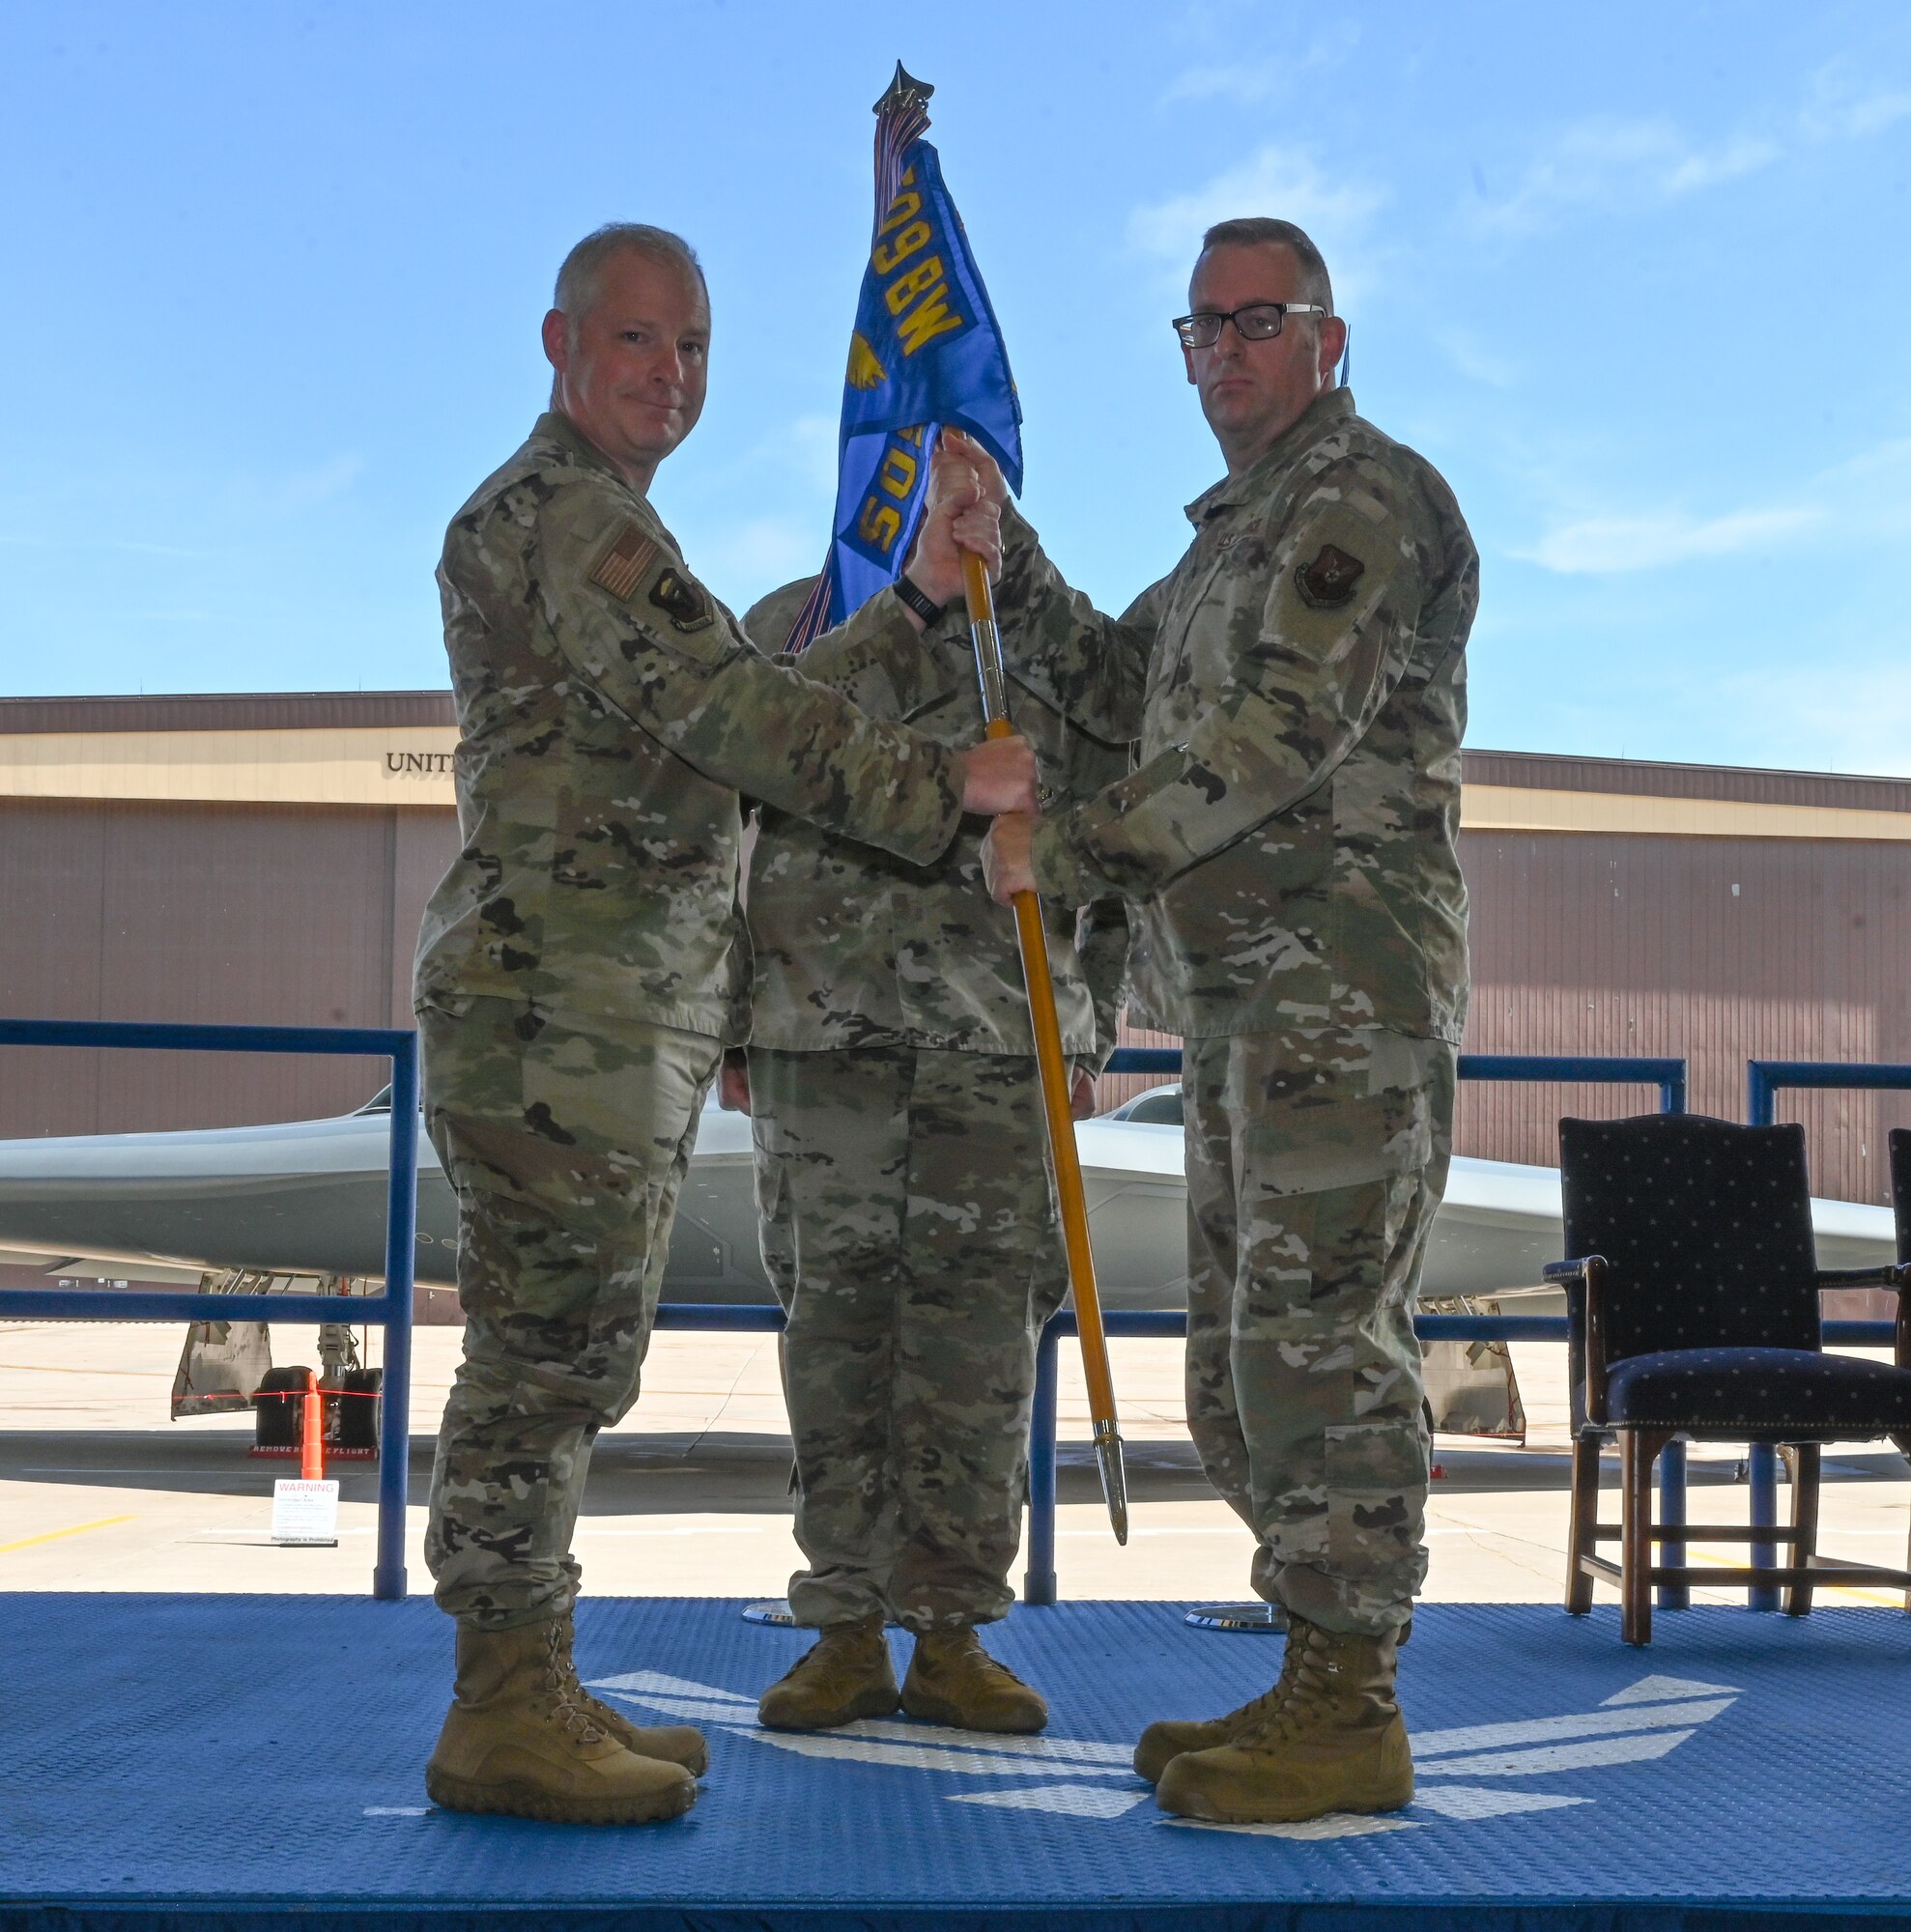 U.S. Air Force Col. Bruce T. Guest assumes command of the 509th Maintenance Group and receives the ceremonial guidon from U.S. Air Force Col. Daniel Diehl, 509th Bomb Wing commander, at Whiteman Air Force Base, Missouri, June 6, 2022. The 509th MXG provides full spectrum organizational and field-level maintenance and munitions support for the 509th Bomb Wing. (U.S. Air Force photo by Airman 1st Class Bryson Britt)